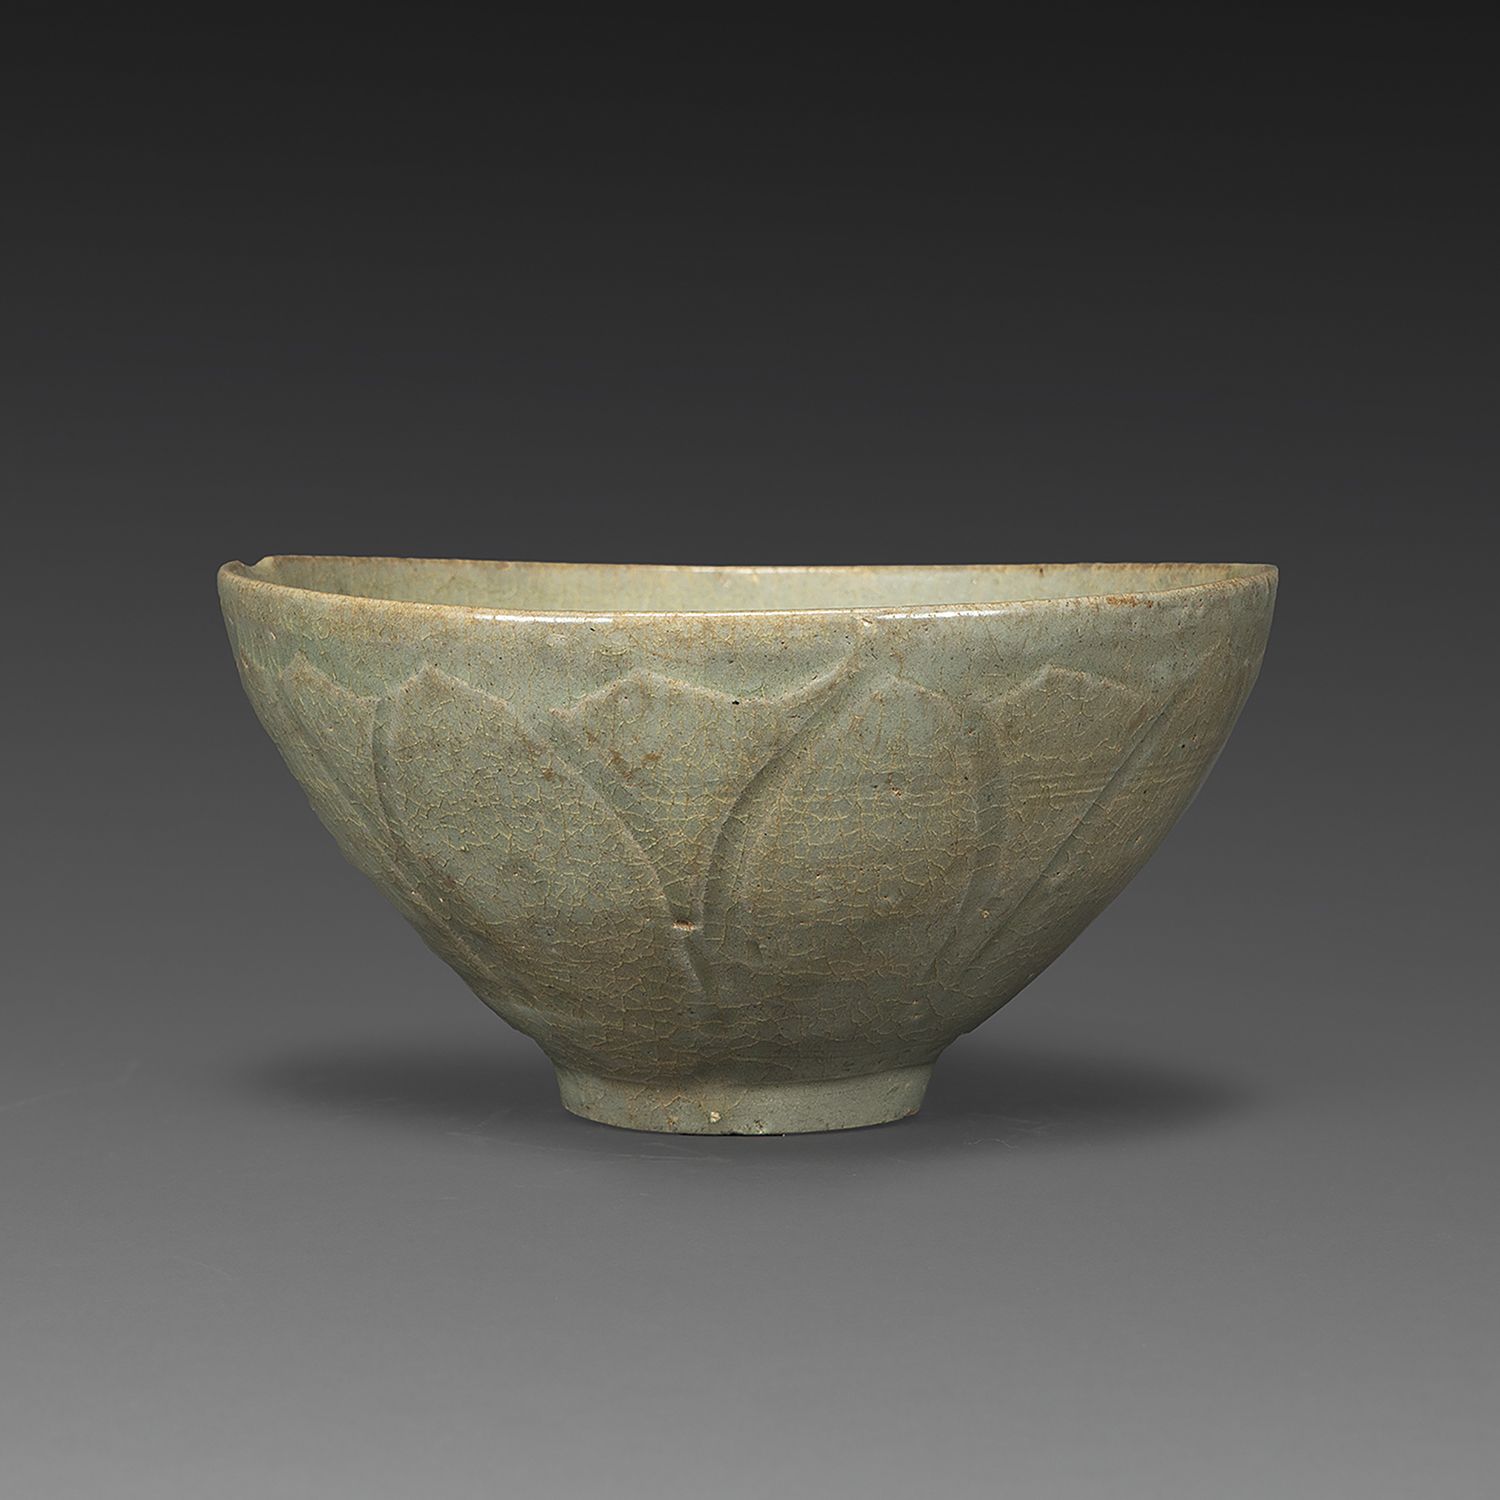 Null CUP
in celadon glazed stoneware, with molded decoration in the form of lotu&hellip;